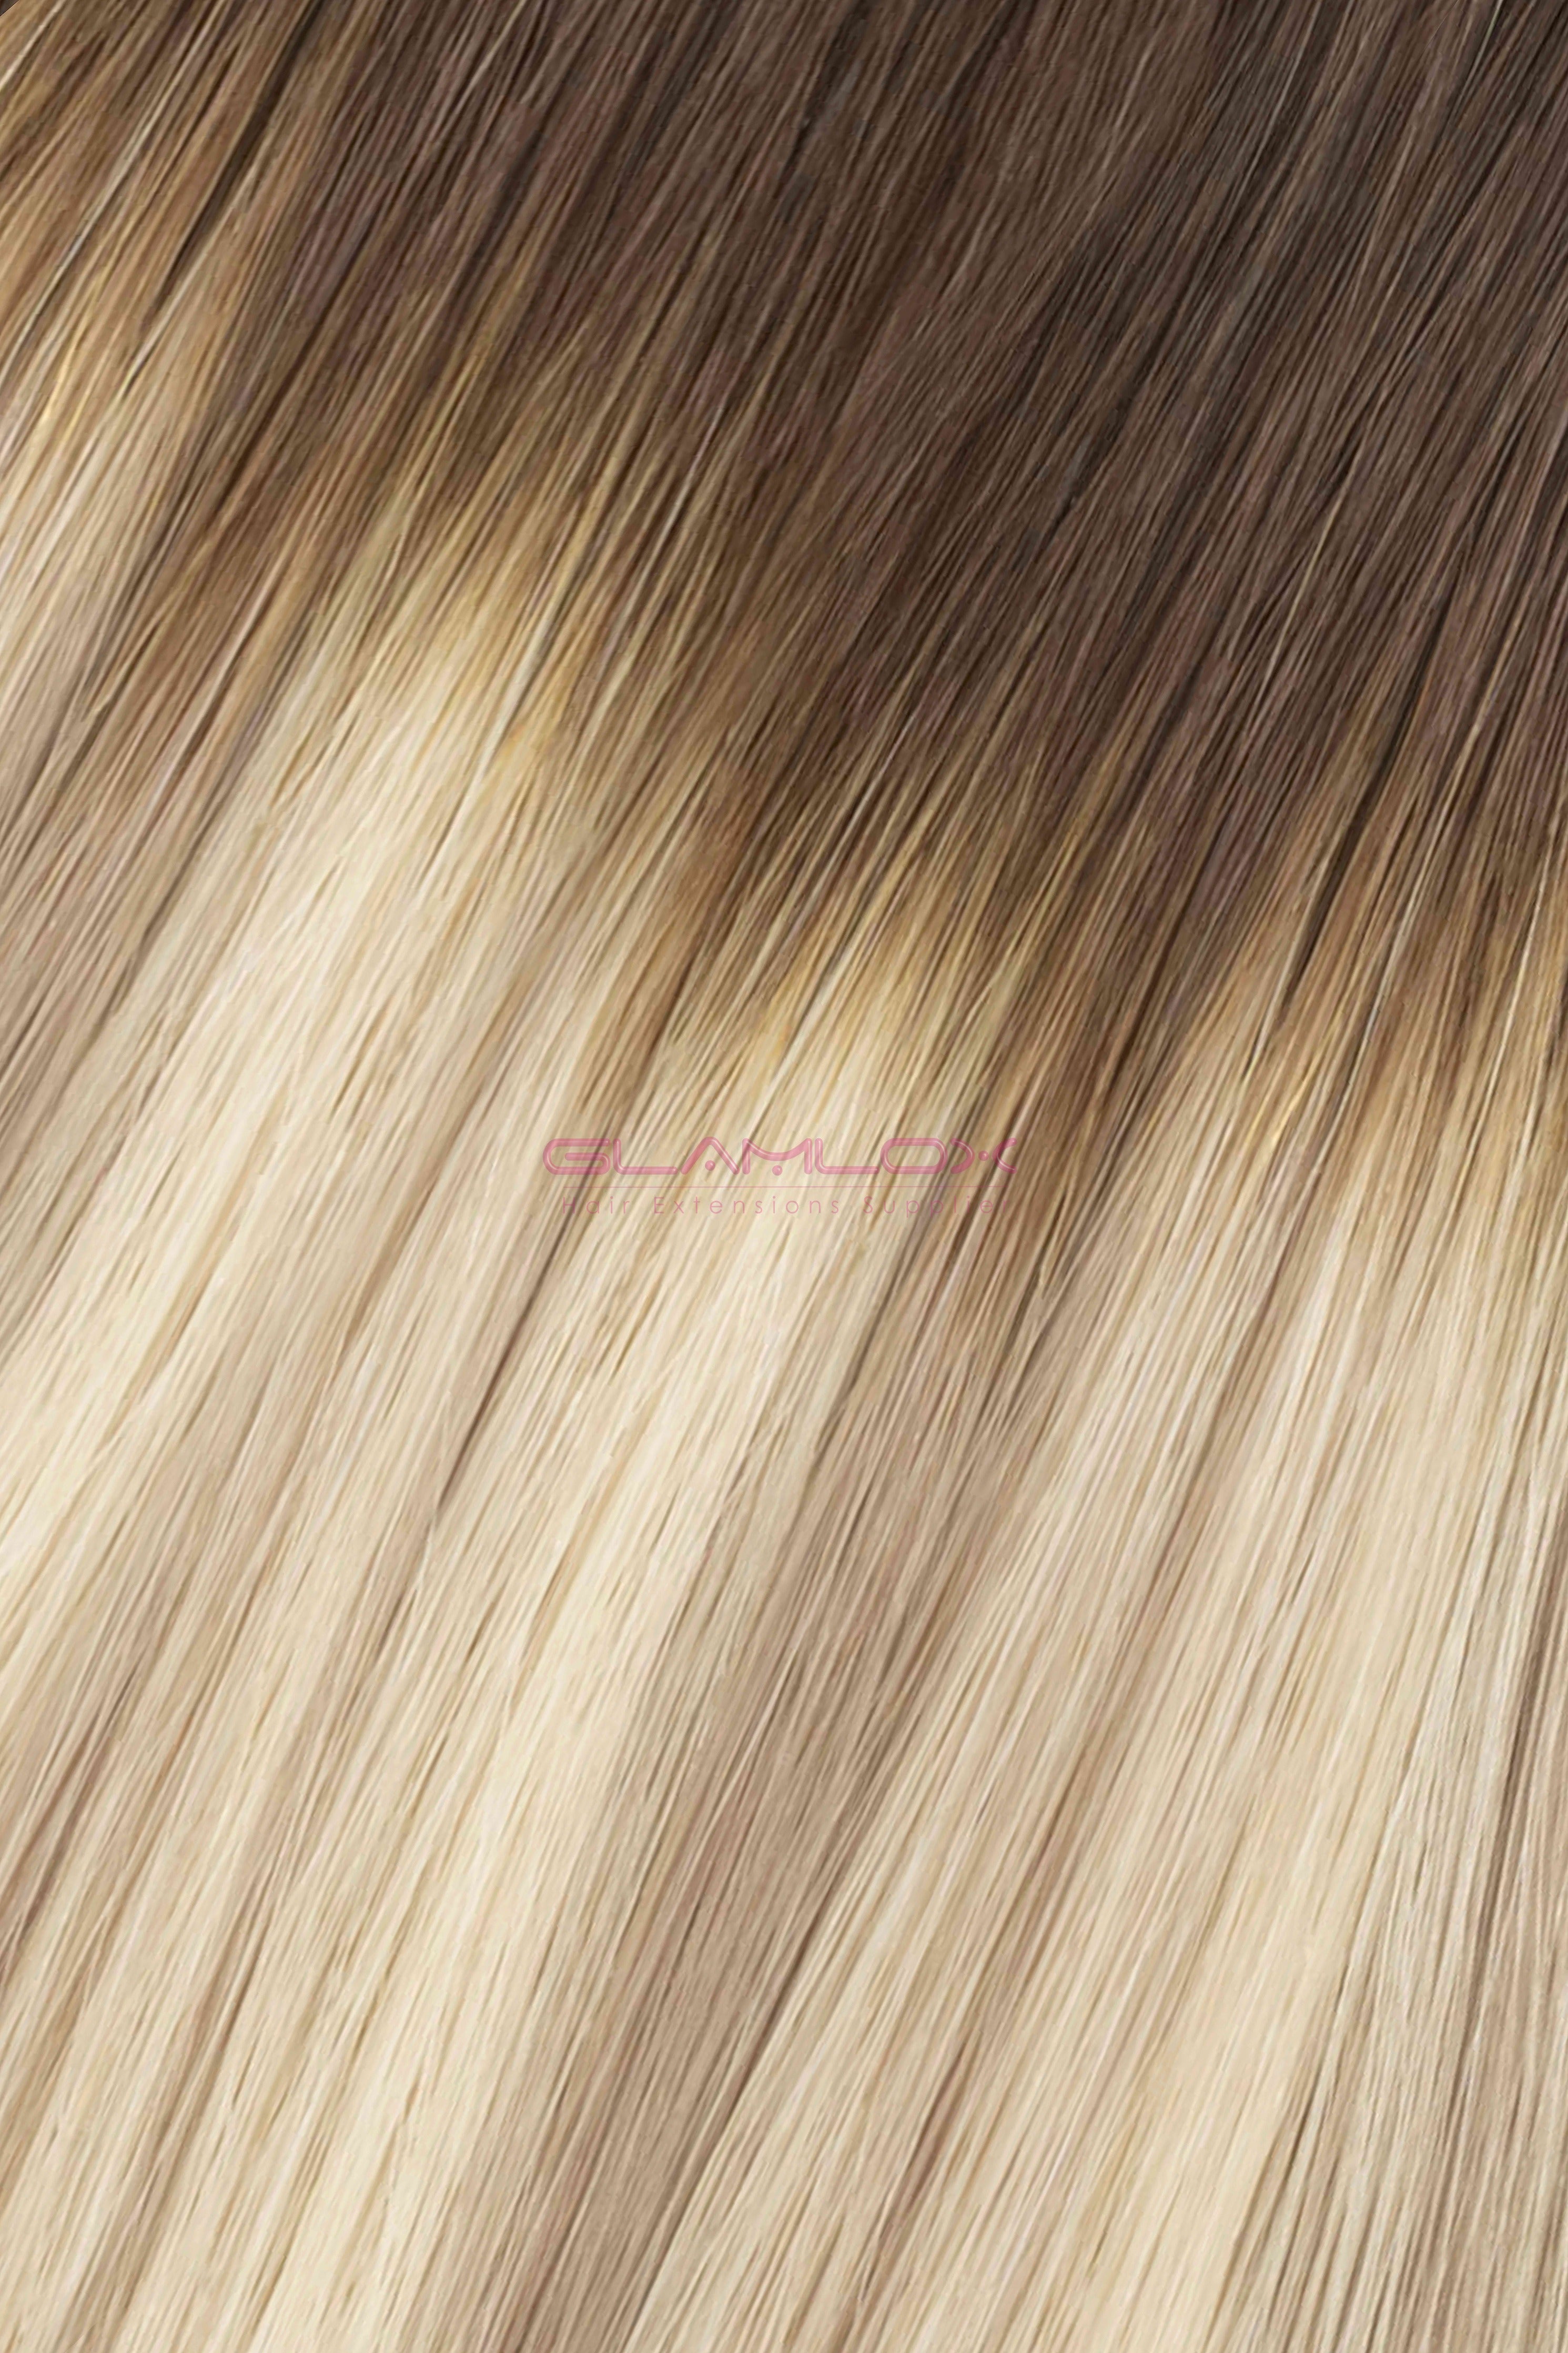 18" Full Weft Hair Extensions - Russian Mongolian Double Drawn Remy Human Hair